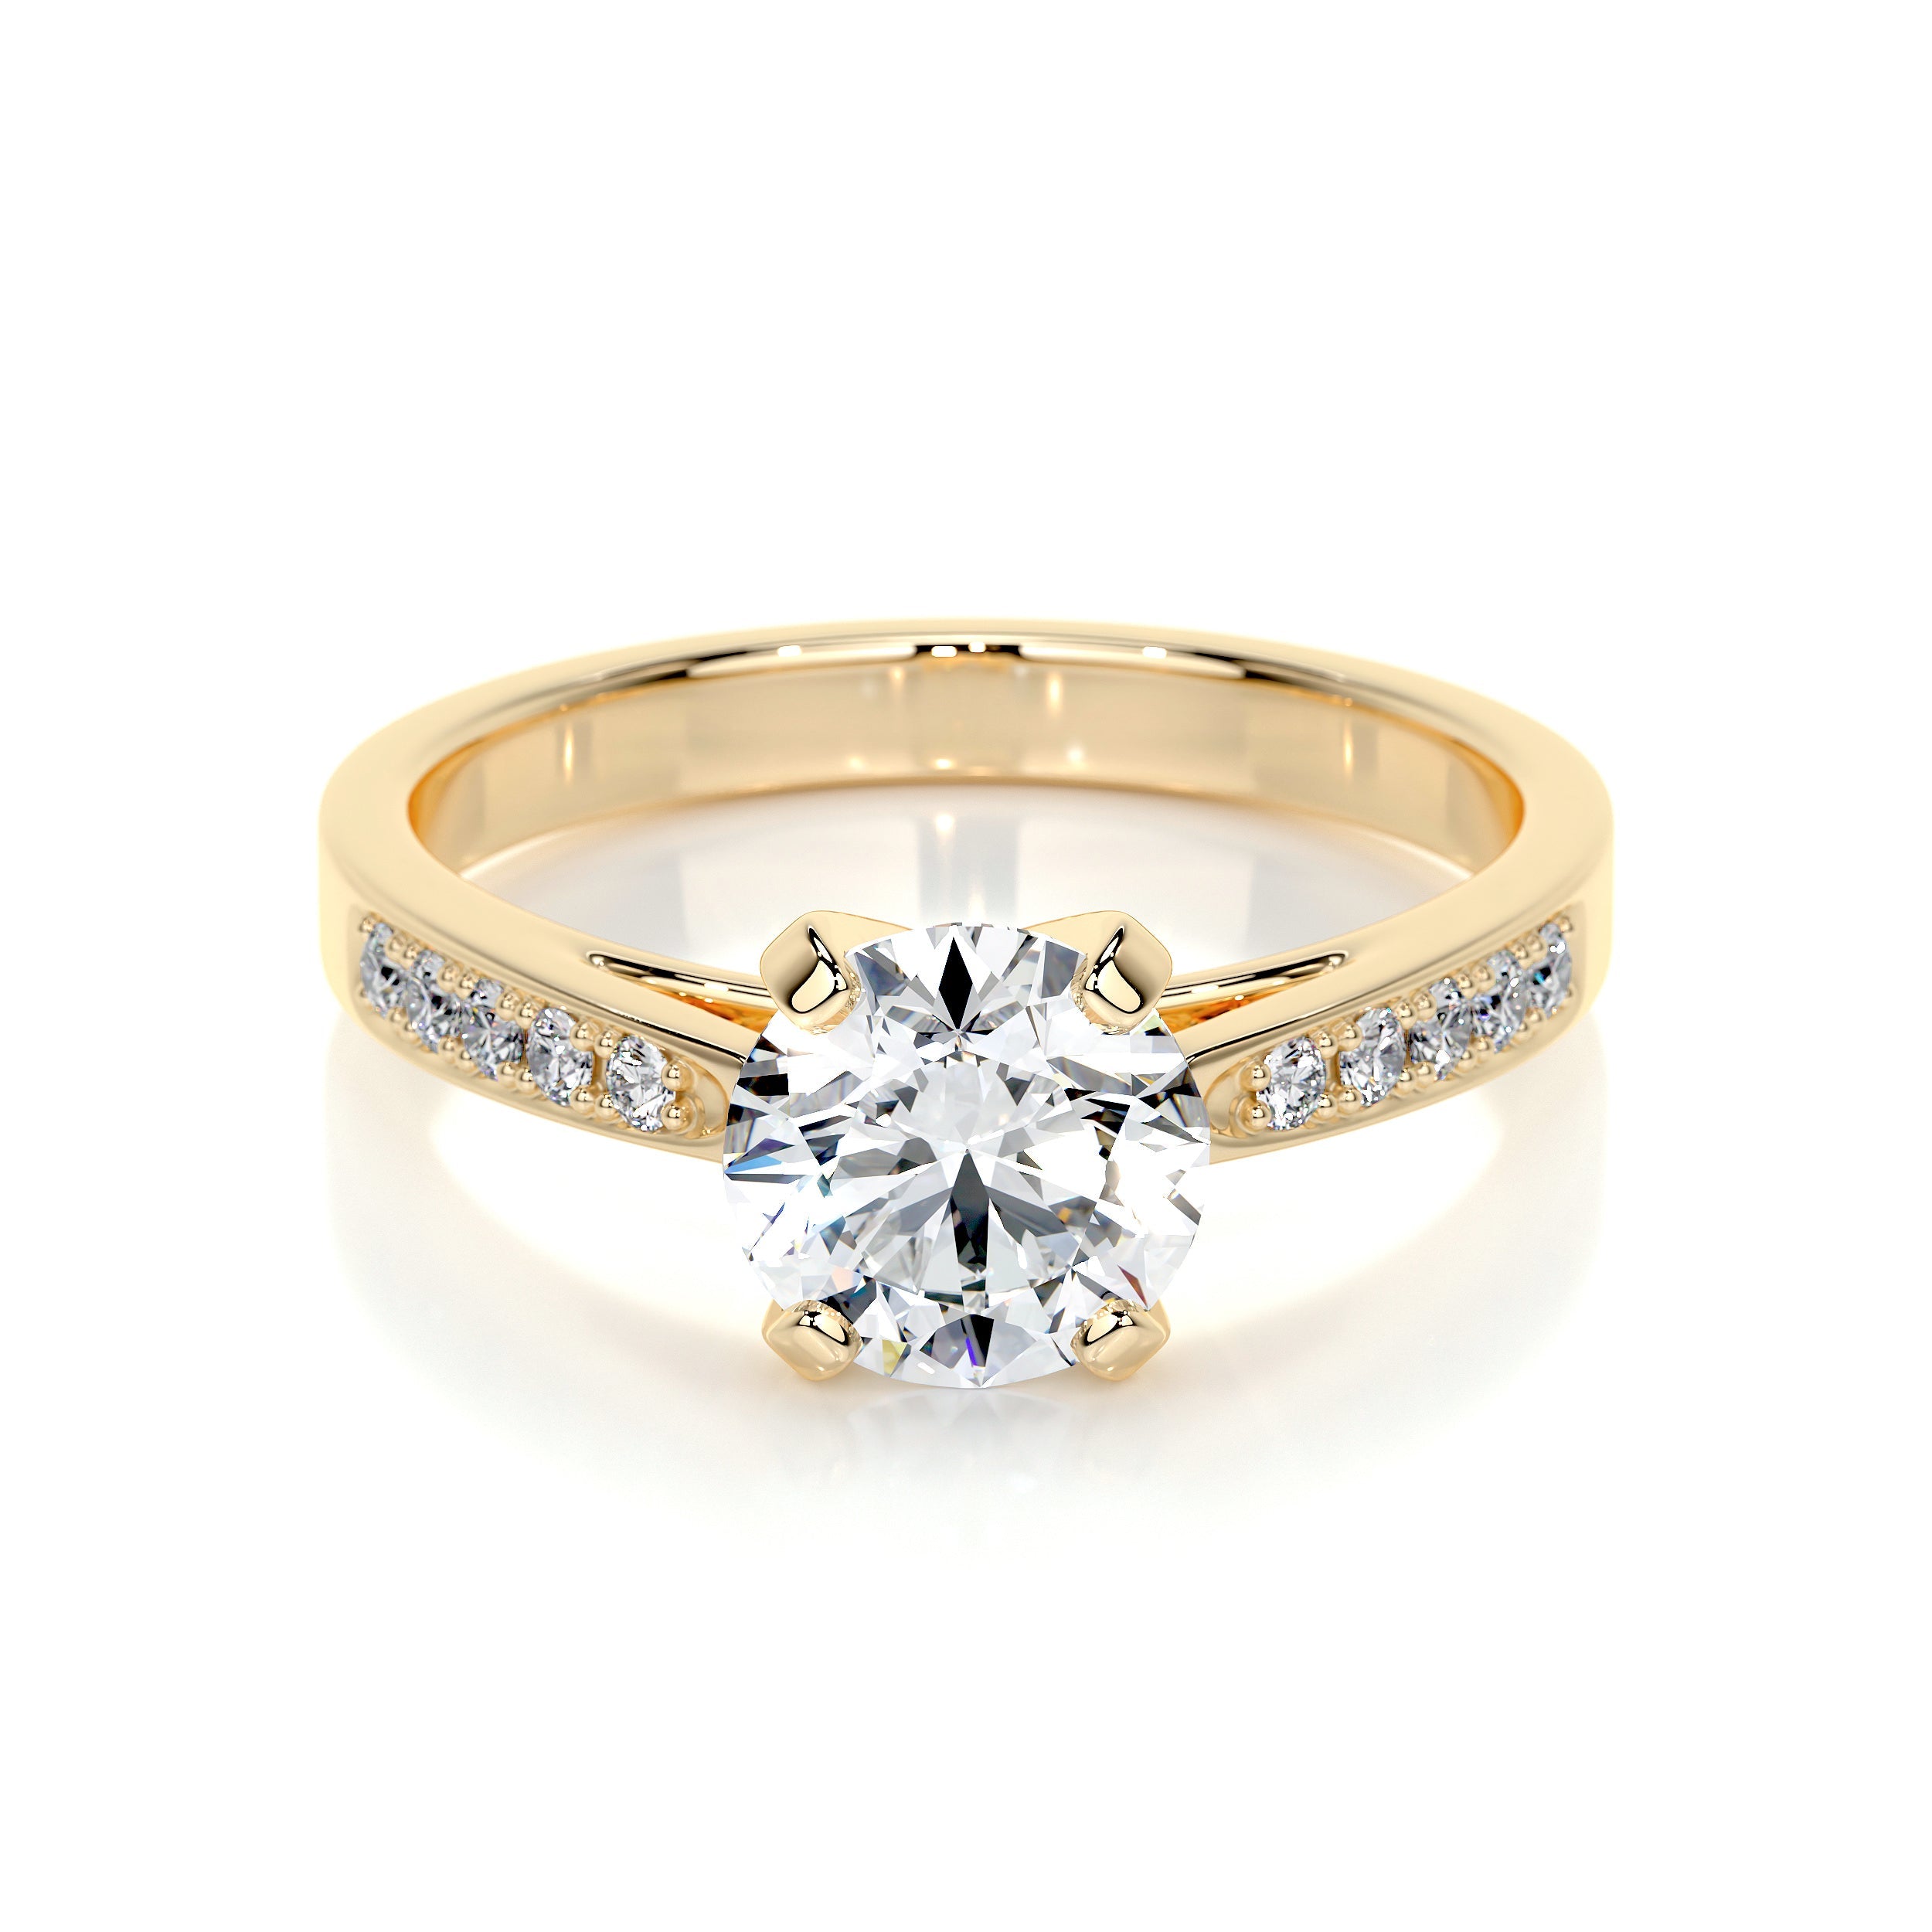 Eleanor Citrine Diamond Ring in 14K and 18K Gold, and Platinum – Tippy  Taste Jewelry